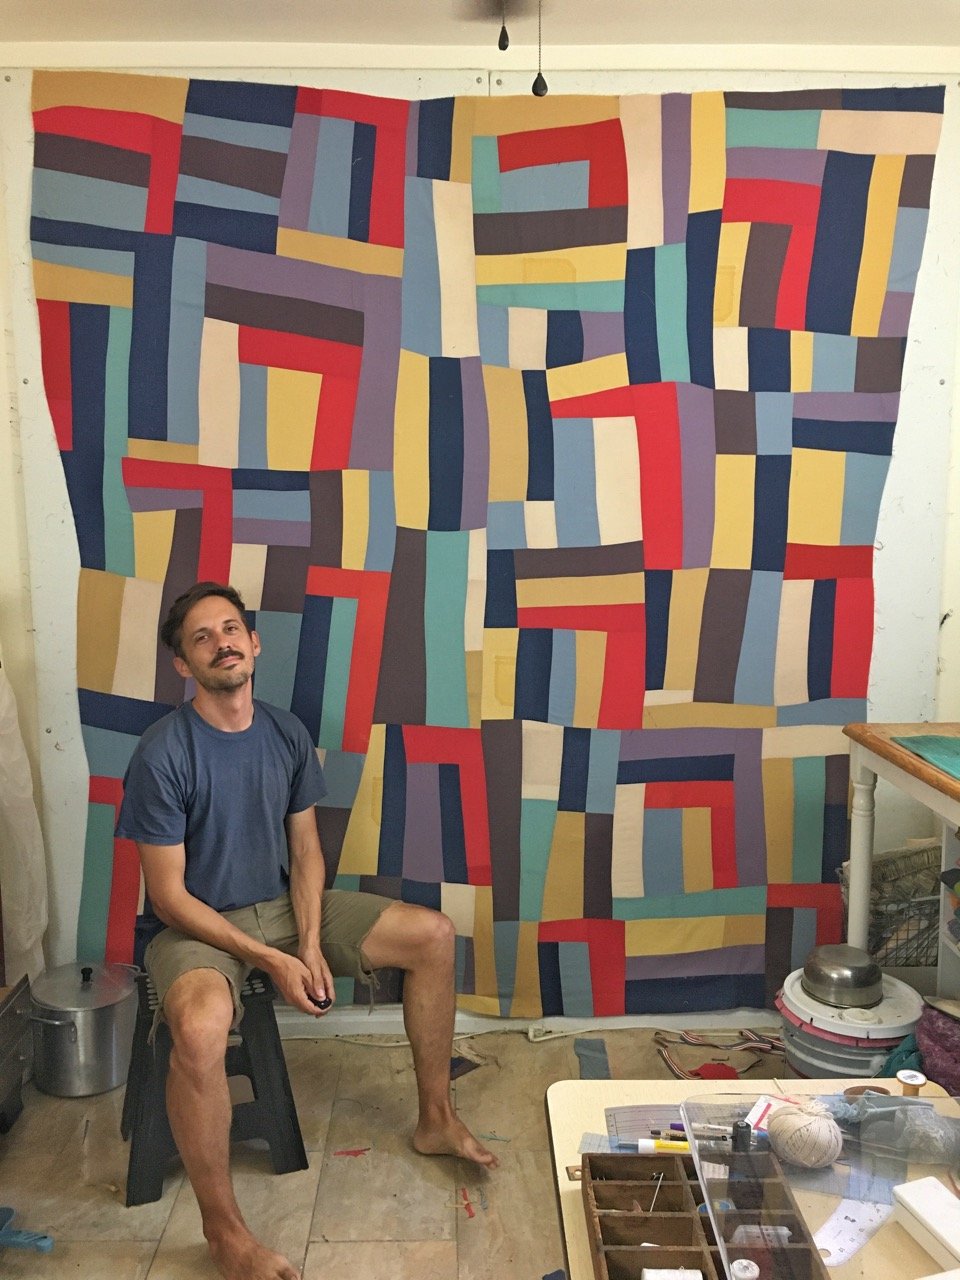 Quilt artist, Zak Foster sits in front of his hanging burial quilt. The colors are a combination of red, blue, yellow, and soft earthy tones.